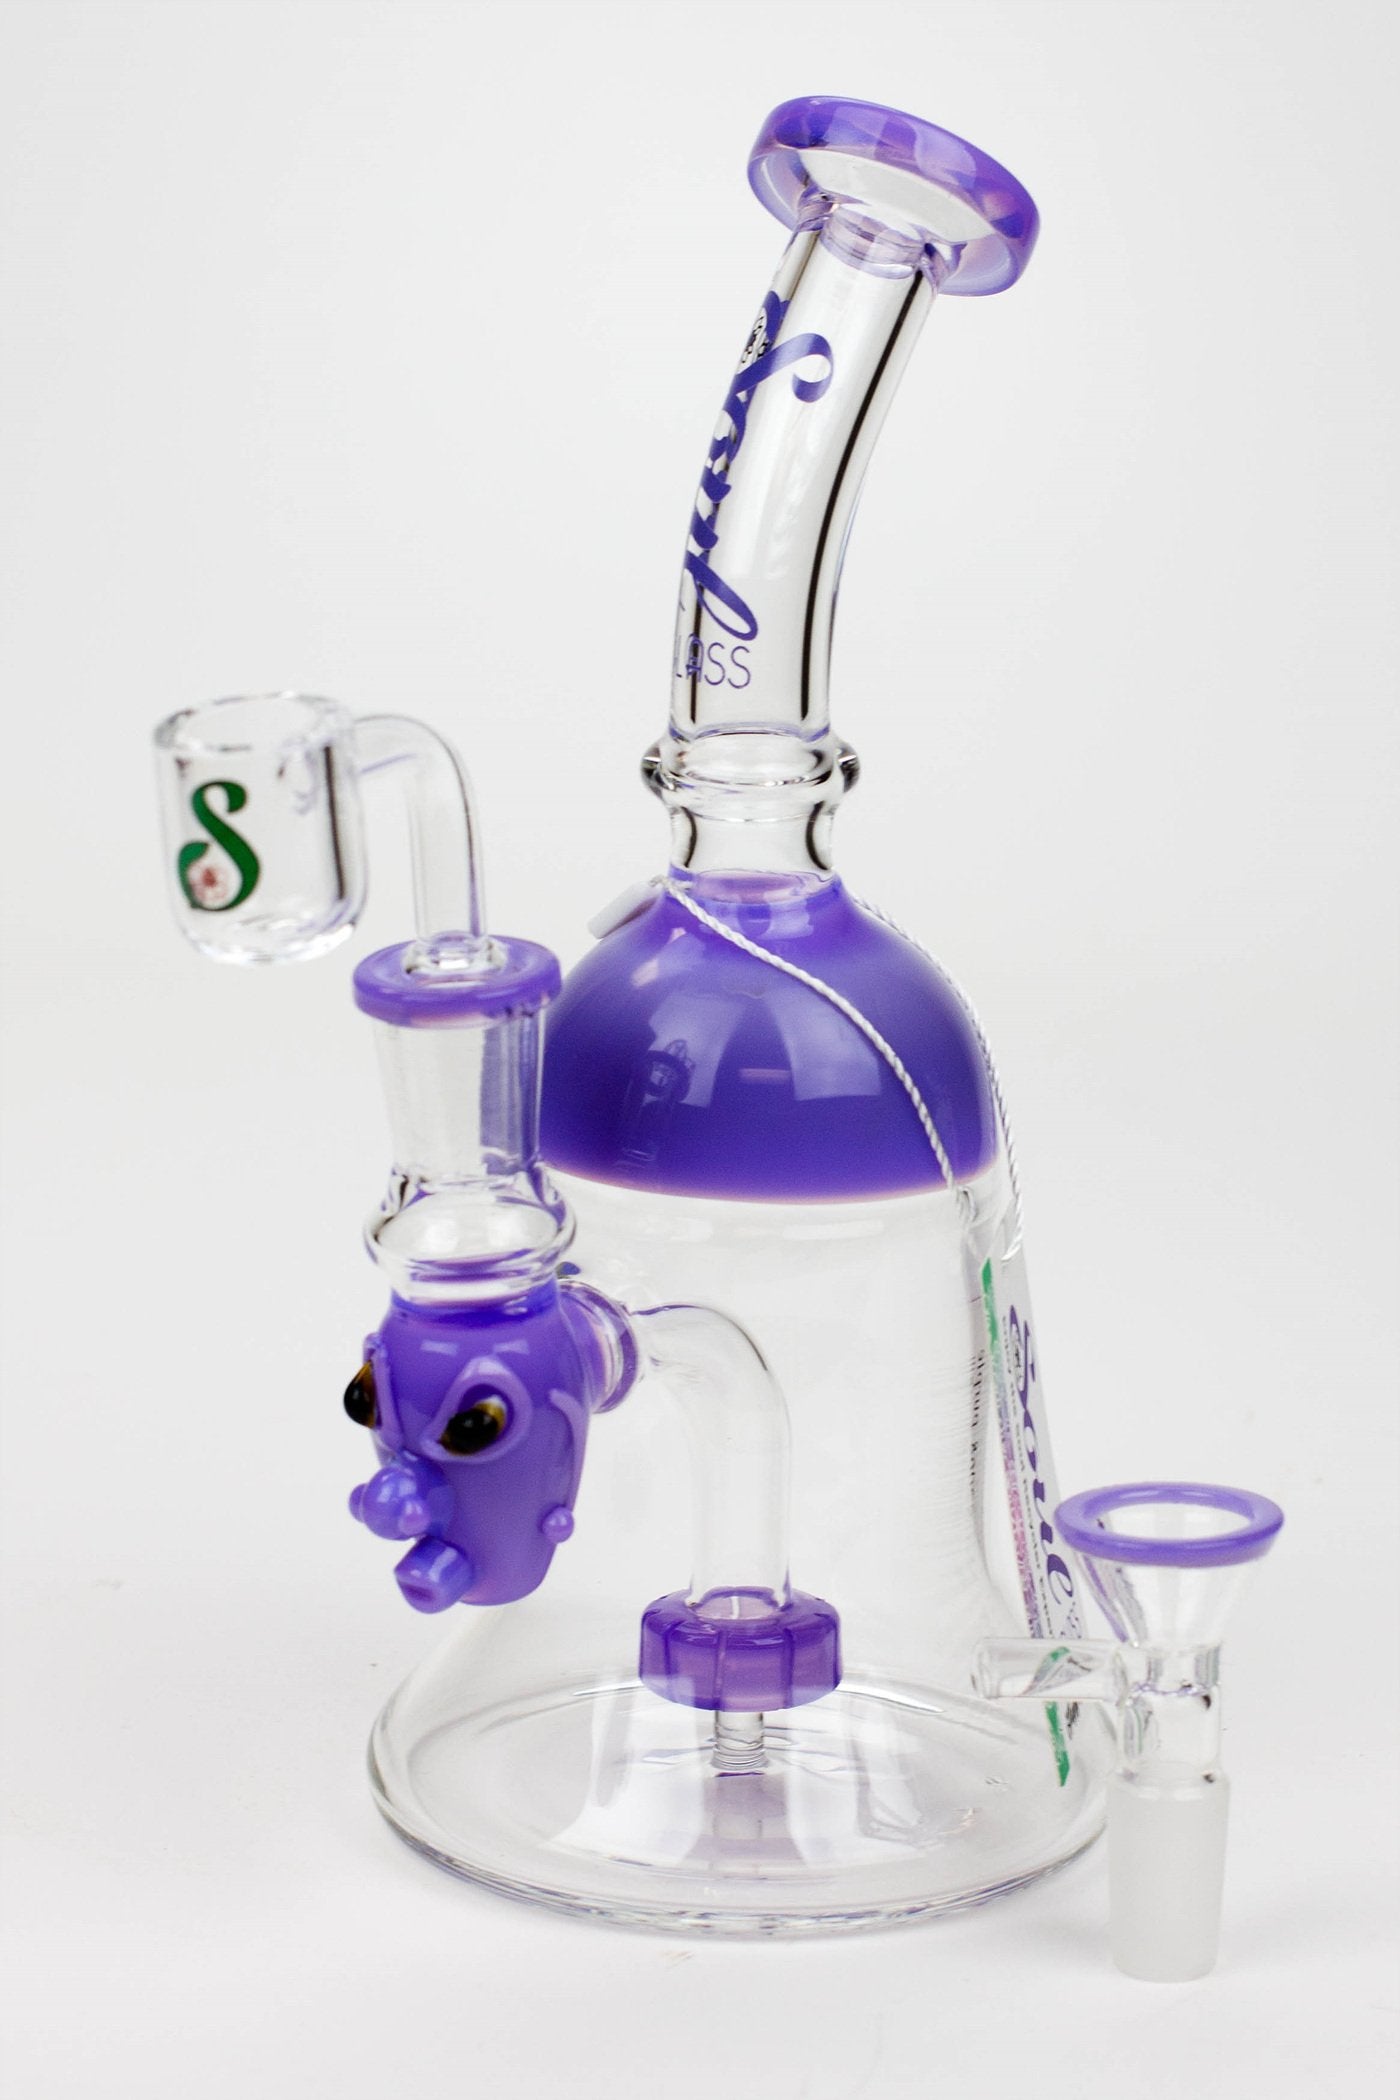 8.5" SOUL Glass 2-in-1 show head diffuser bong_8